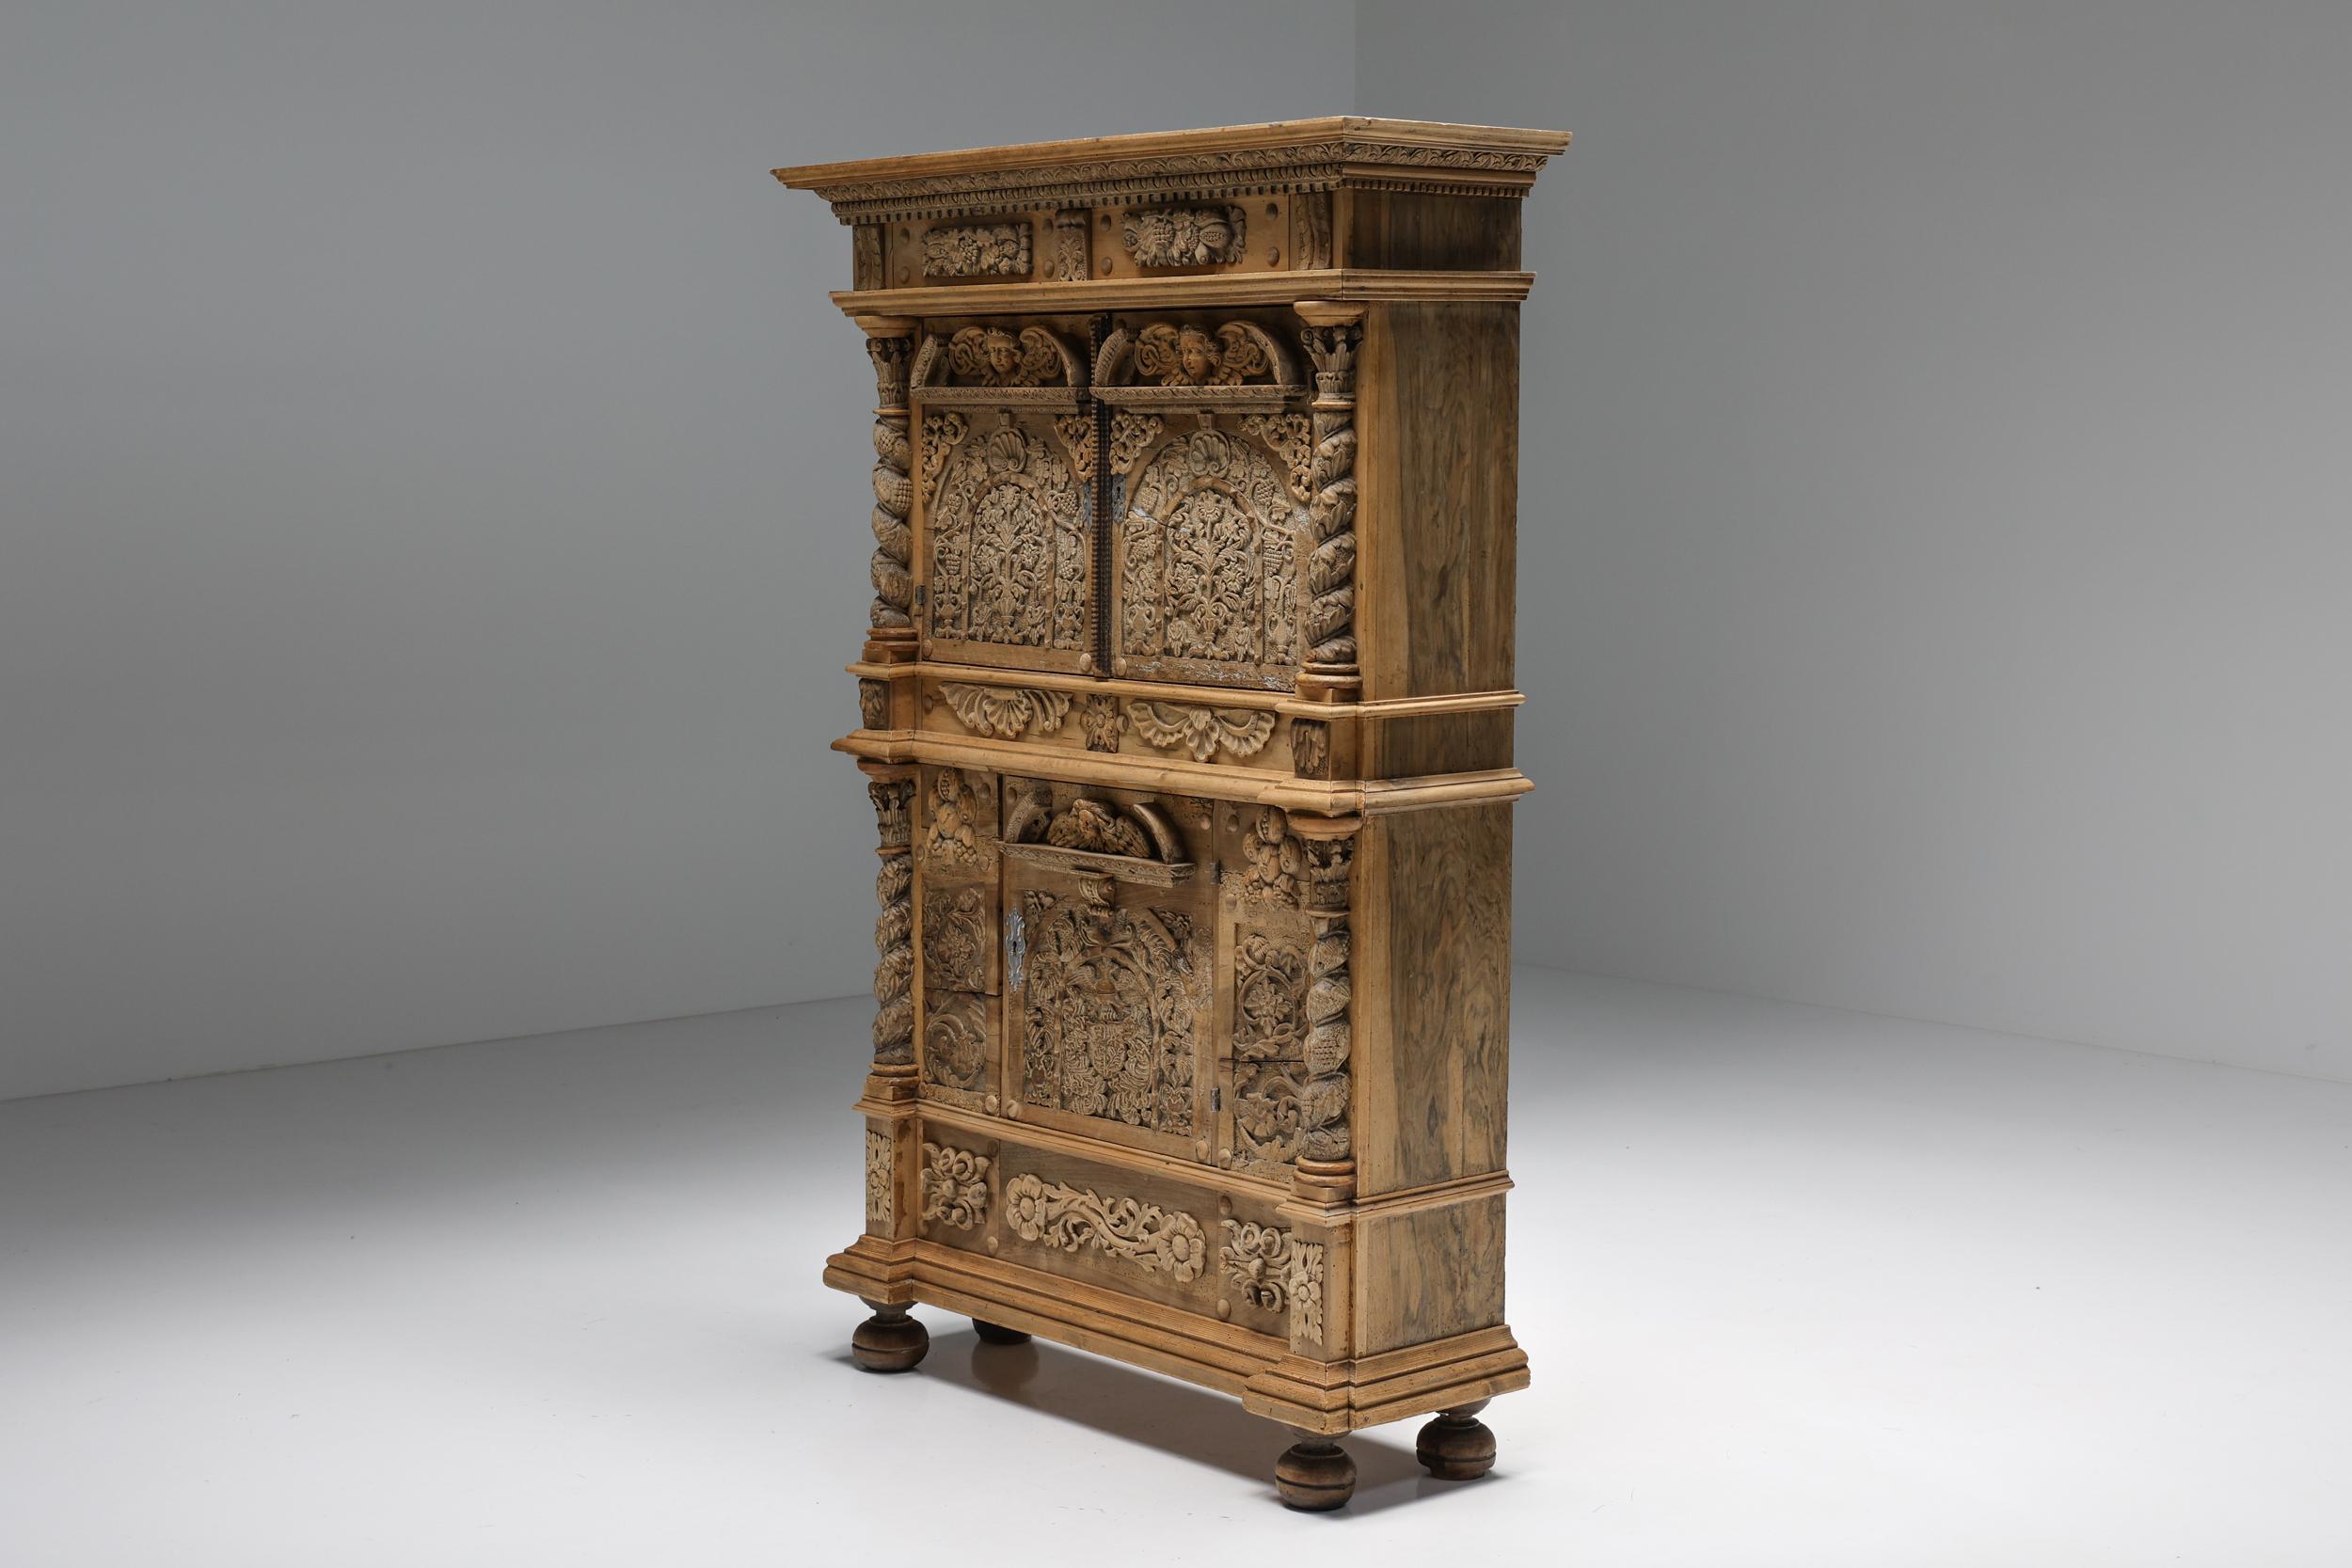 German; Baroque; leached walnut; three-door; cabinet; cupboard; German Design; Germany; 17th century; 18th century; 

A German Baroque leached walnut cupboard, carved and highly detailed with a distinctive character. This cabinet dates from the